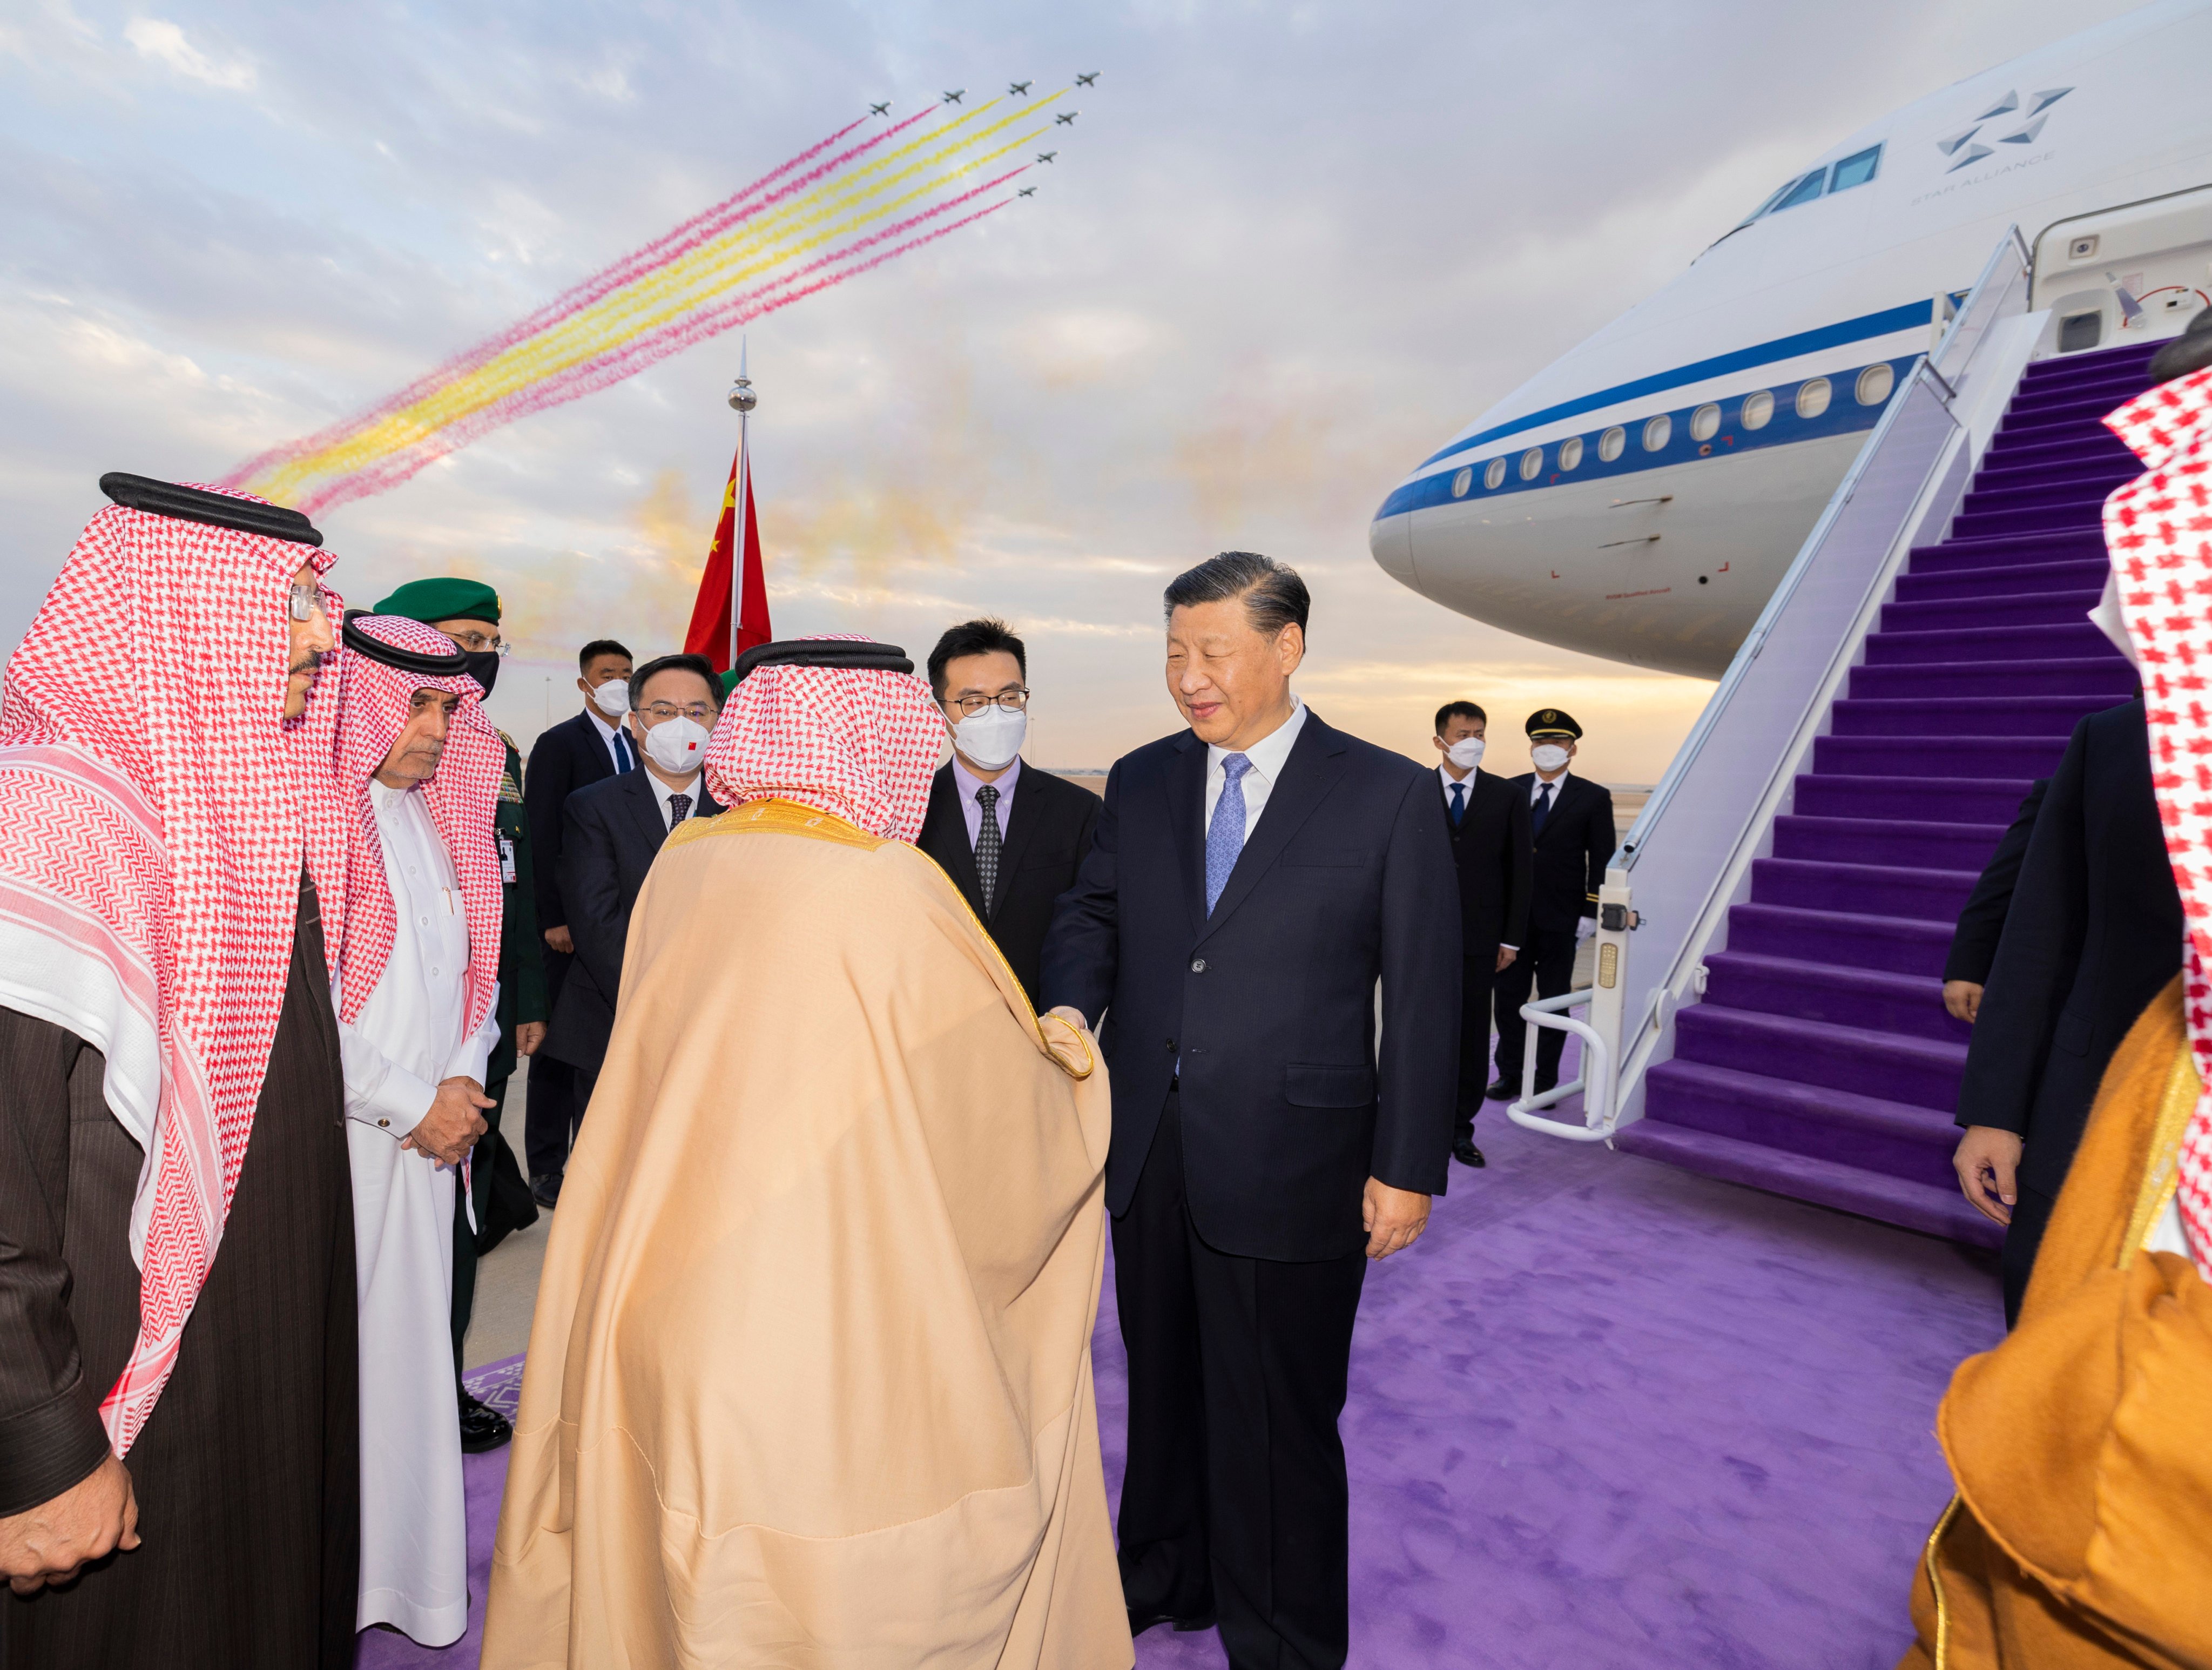 President Xi Jinping (right) receives greetings from Riyadh Province Governor Prince Faisal bin Bandar Al Saud and other senior officials upon arriving in Riyadh on December 7, 2022. Saudi Arabia could be among a new wave of BRICS members as China pushes to expand the bloc, but internal issues and regional rivalries could complicate efforts to expand the group’s influence. Photo: Xinhua